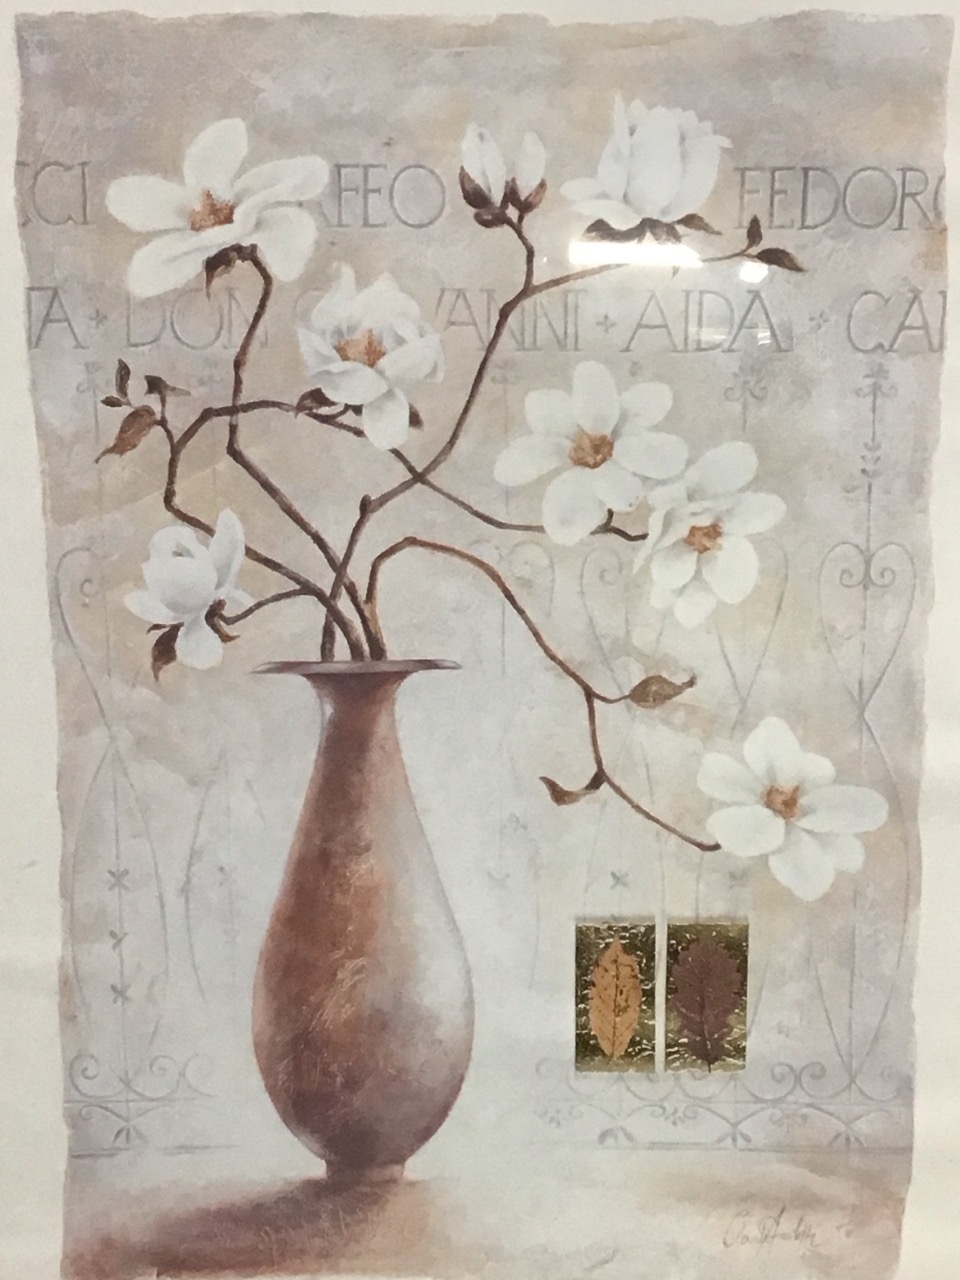 Coloured lithograph, magnolia in a vase with opera titles and metallic leaf details, indistinctly